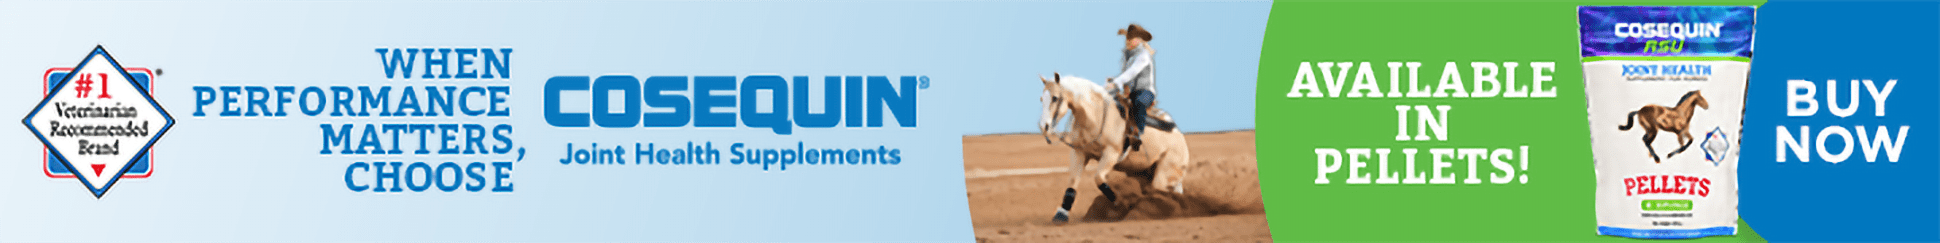 When performance matters, choose Cosequin Joint Health Supplements. Now Available in Pellets! Buy Now